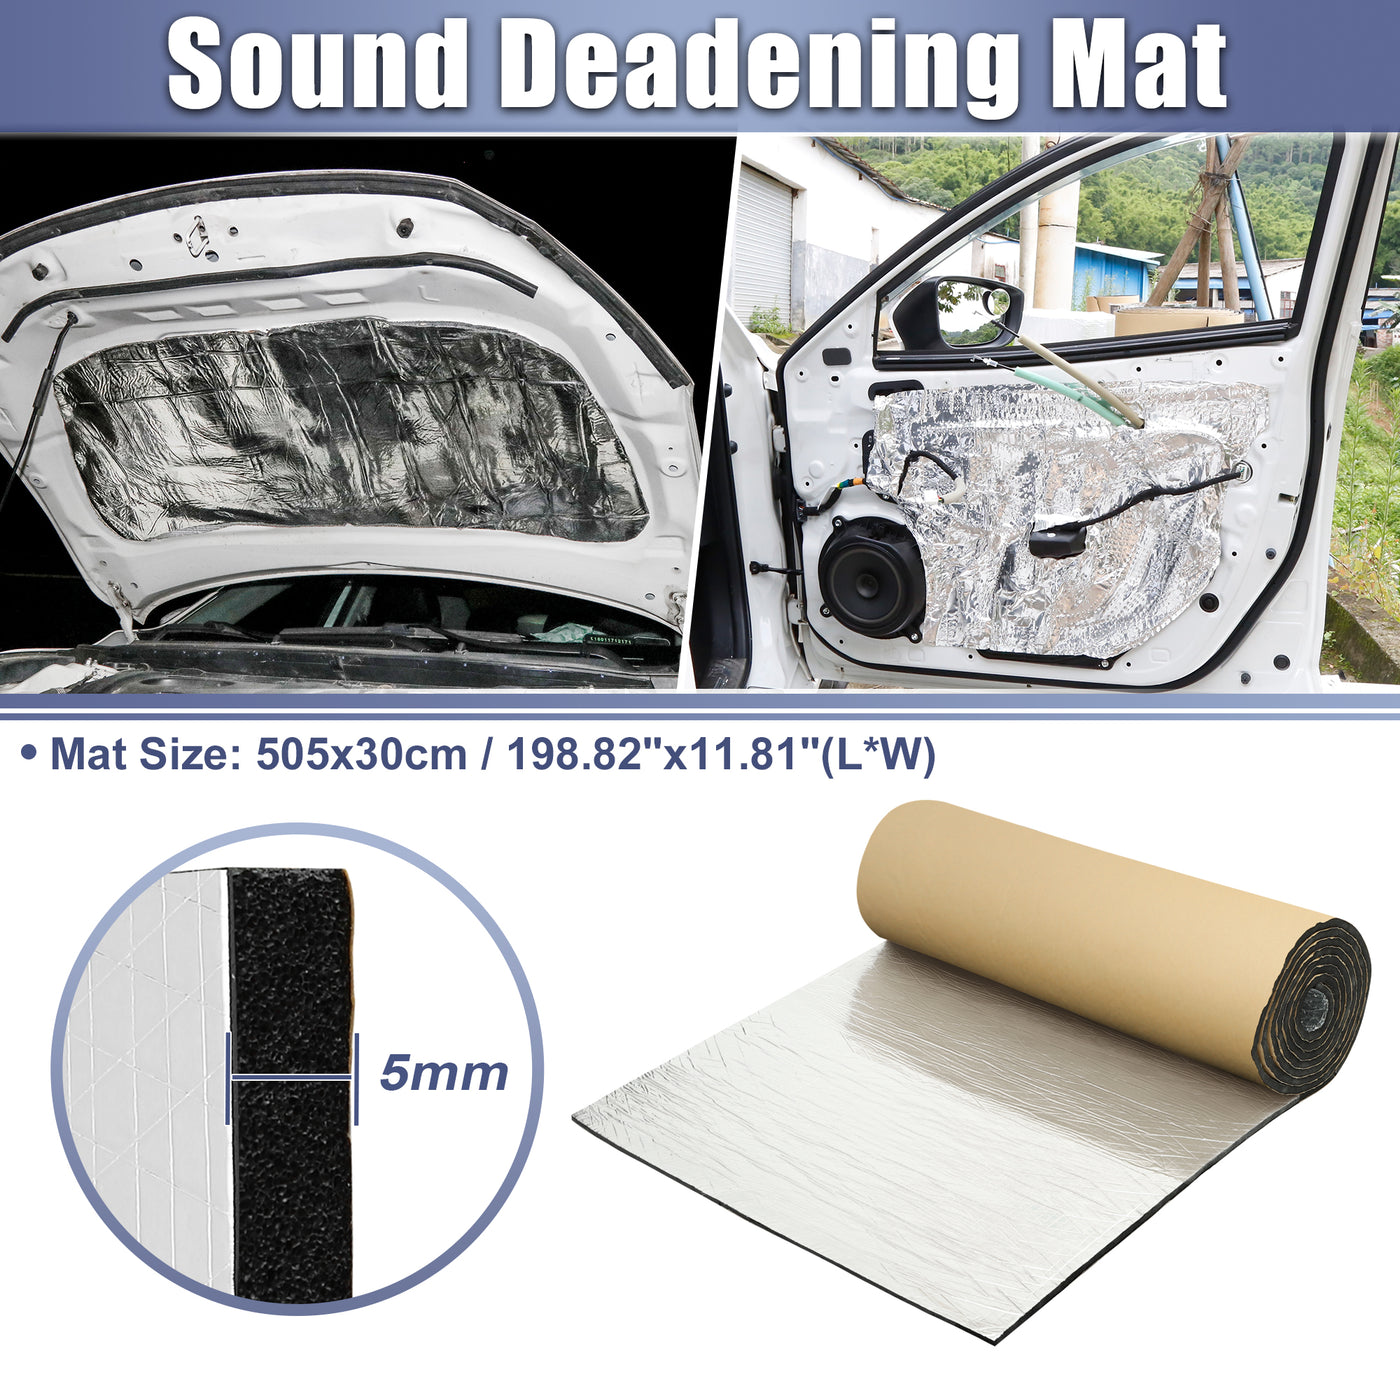 X AUTOHAUX 197mil 5mm 16.31sqft Car Sound Deadening Mat Aluminum Foil Closed Cell Foam Heat Shield Material Self Adhesive Universal for Hood Fender and Boat Engine Cover 198.82"x11.81"